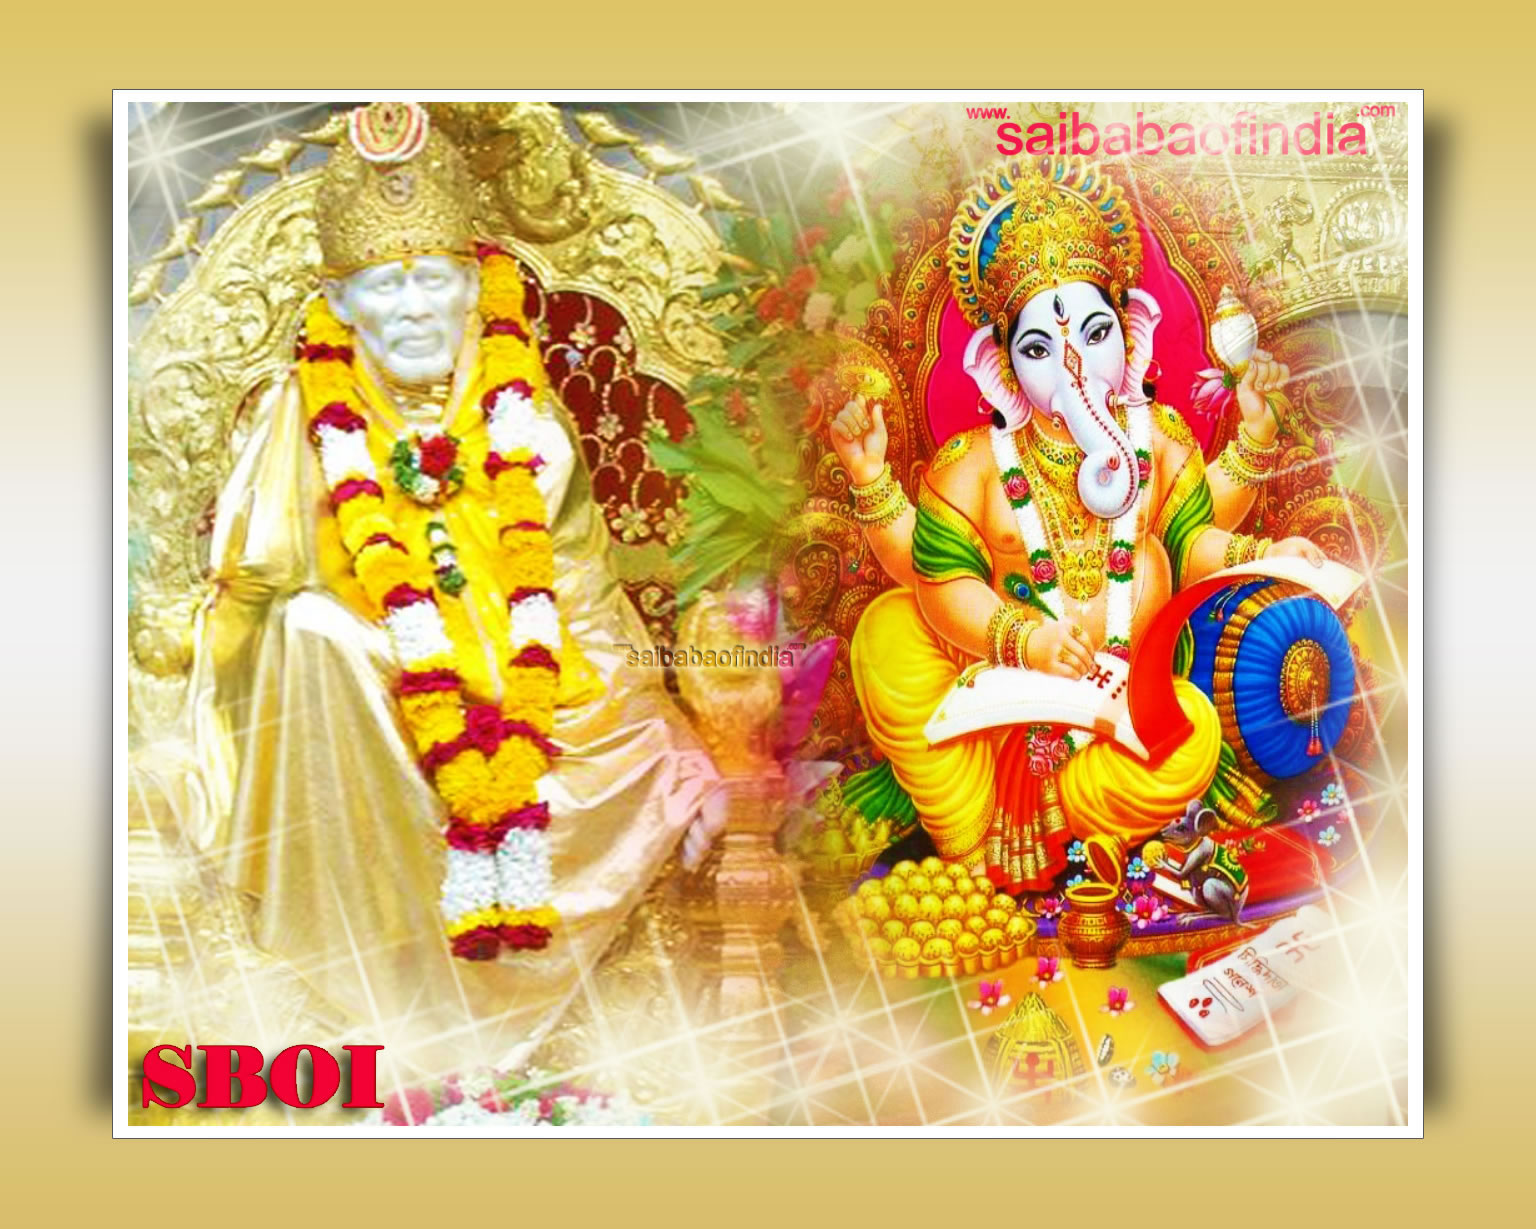 photos of Ganesh ji appearing on the Shirdi Sai Pictures in Udi